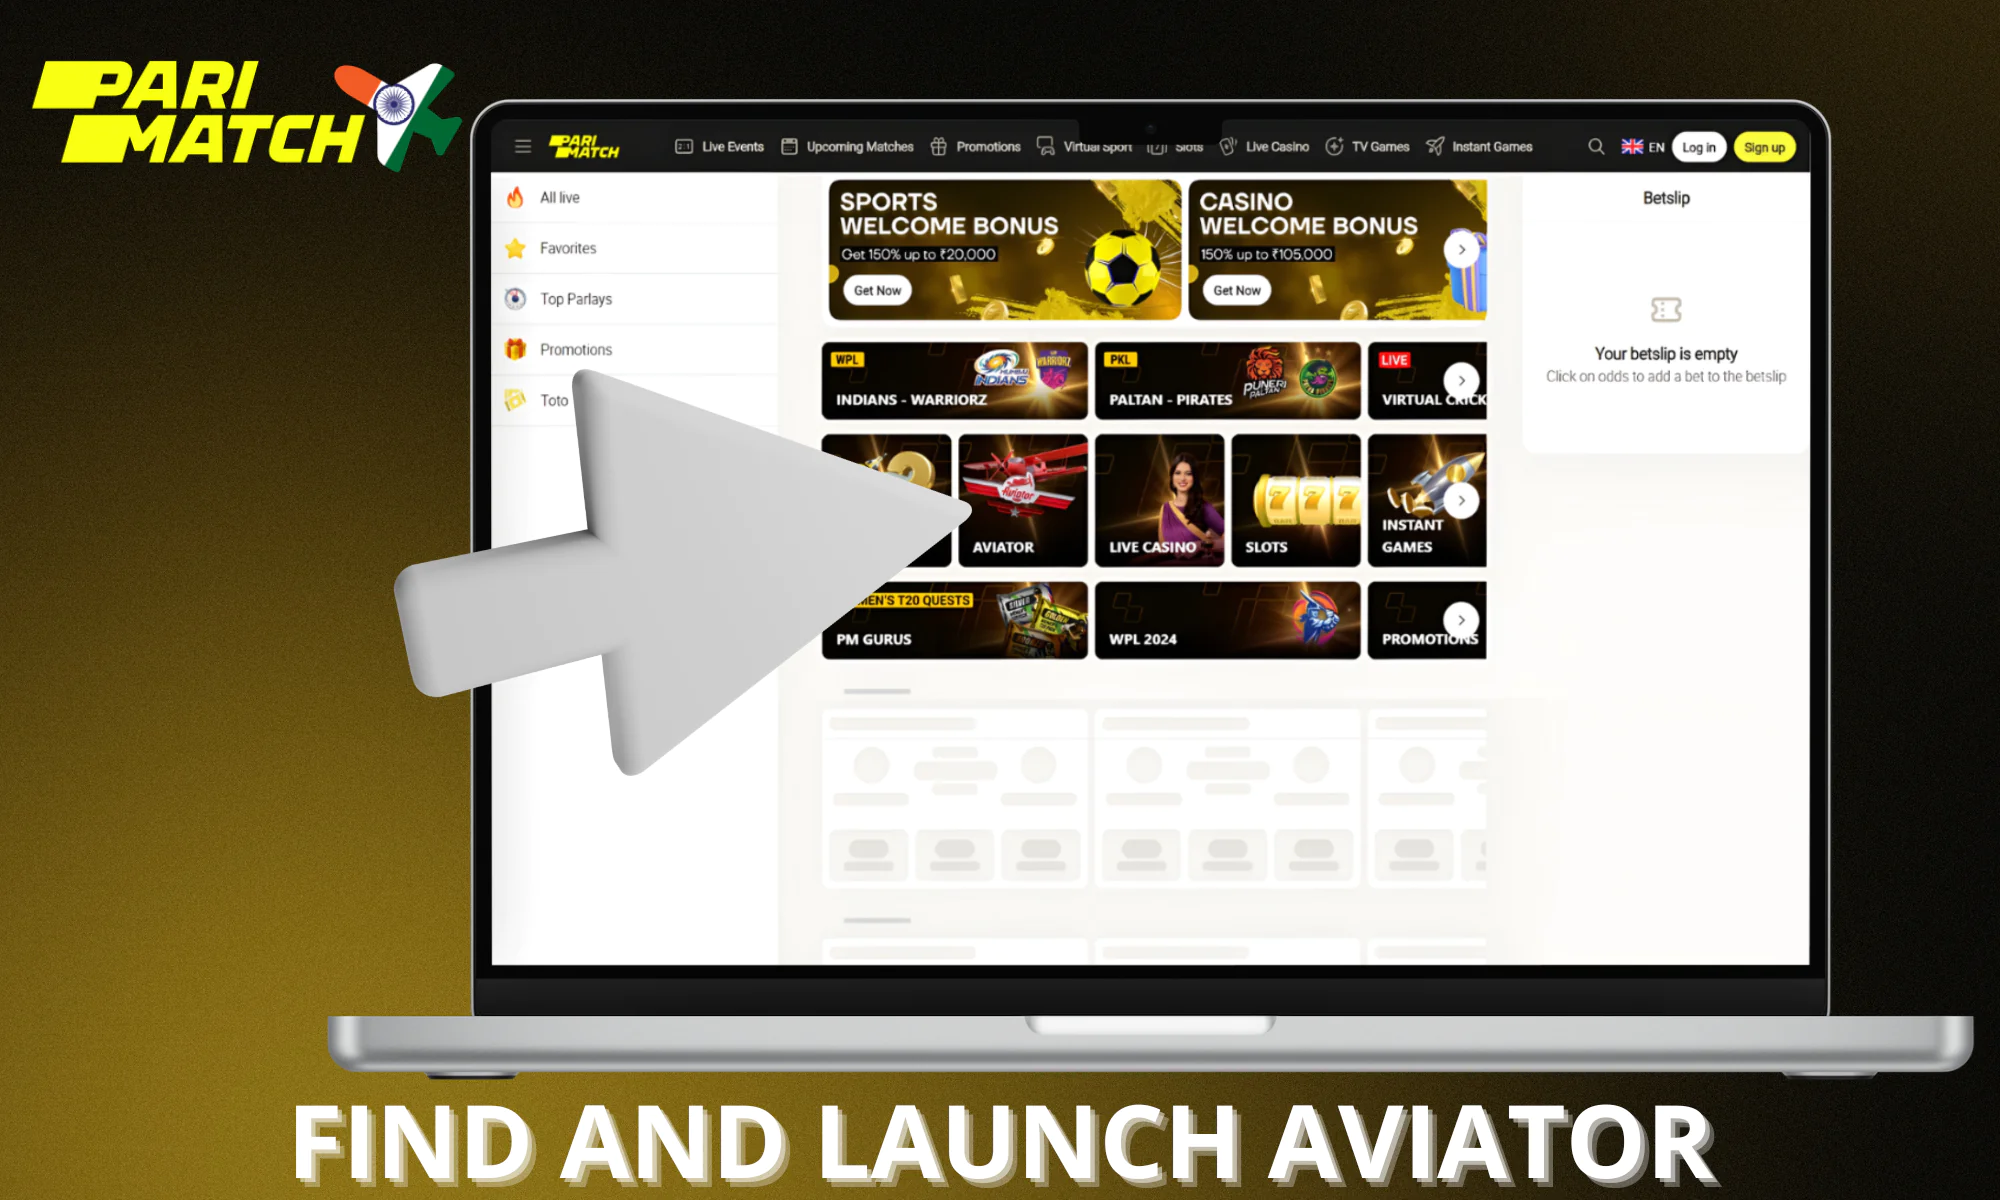 The Aviator game launch button is located on the Parimatch home page